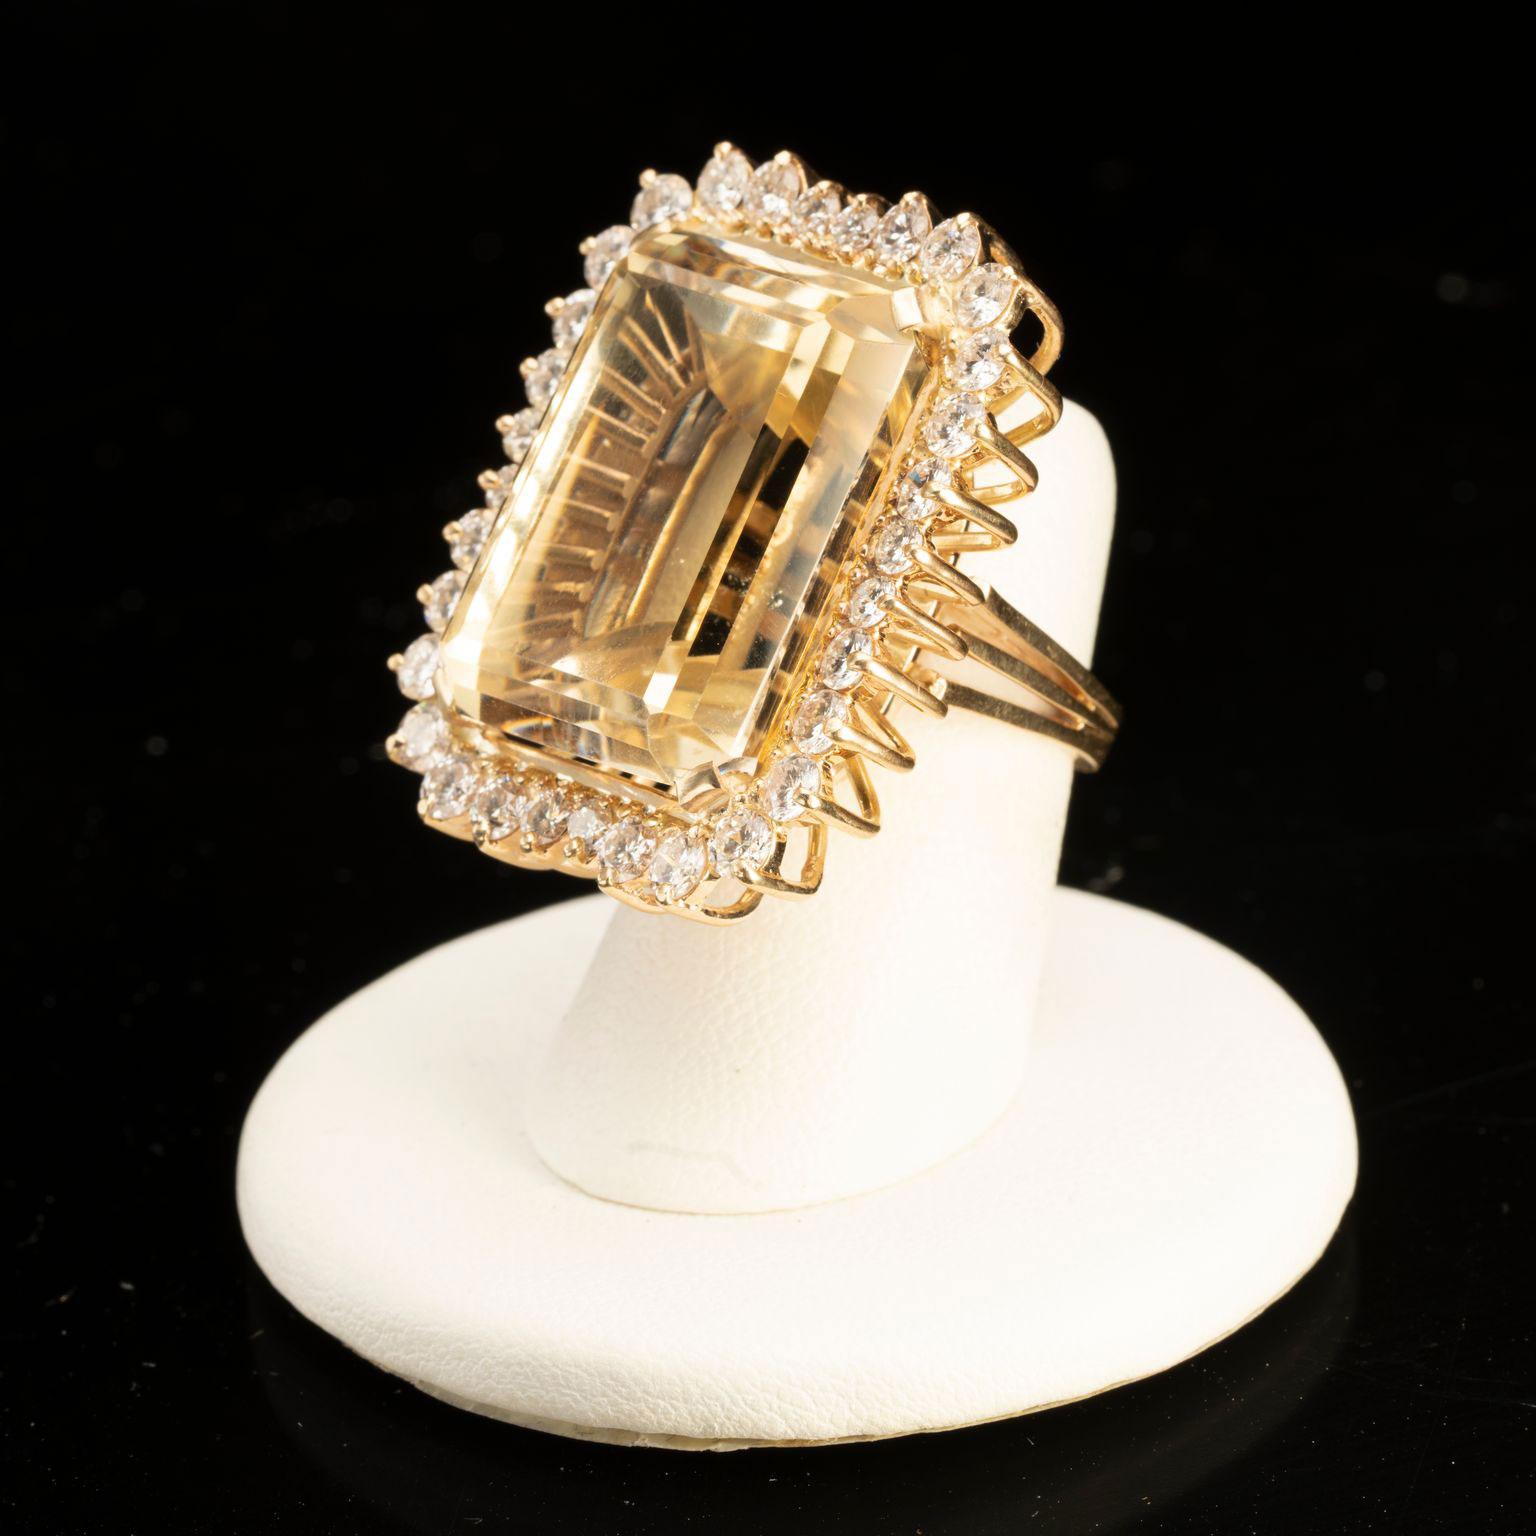 This huge cushion cut sixty carat citrine is surrounded on all sides by 3.25 carats of dazzling white diamonds. Set in 14 karat yellow gold, this is a truly unforgettable custom designed piece that will spark conversation wherever you wear it and is